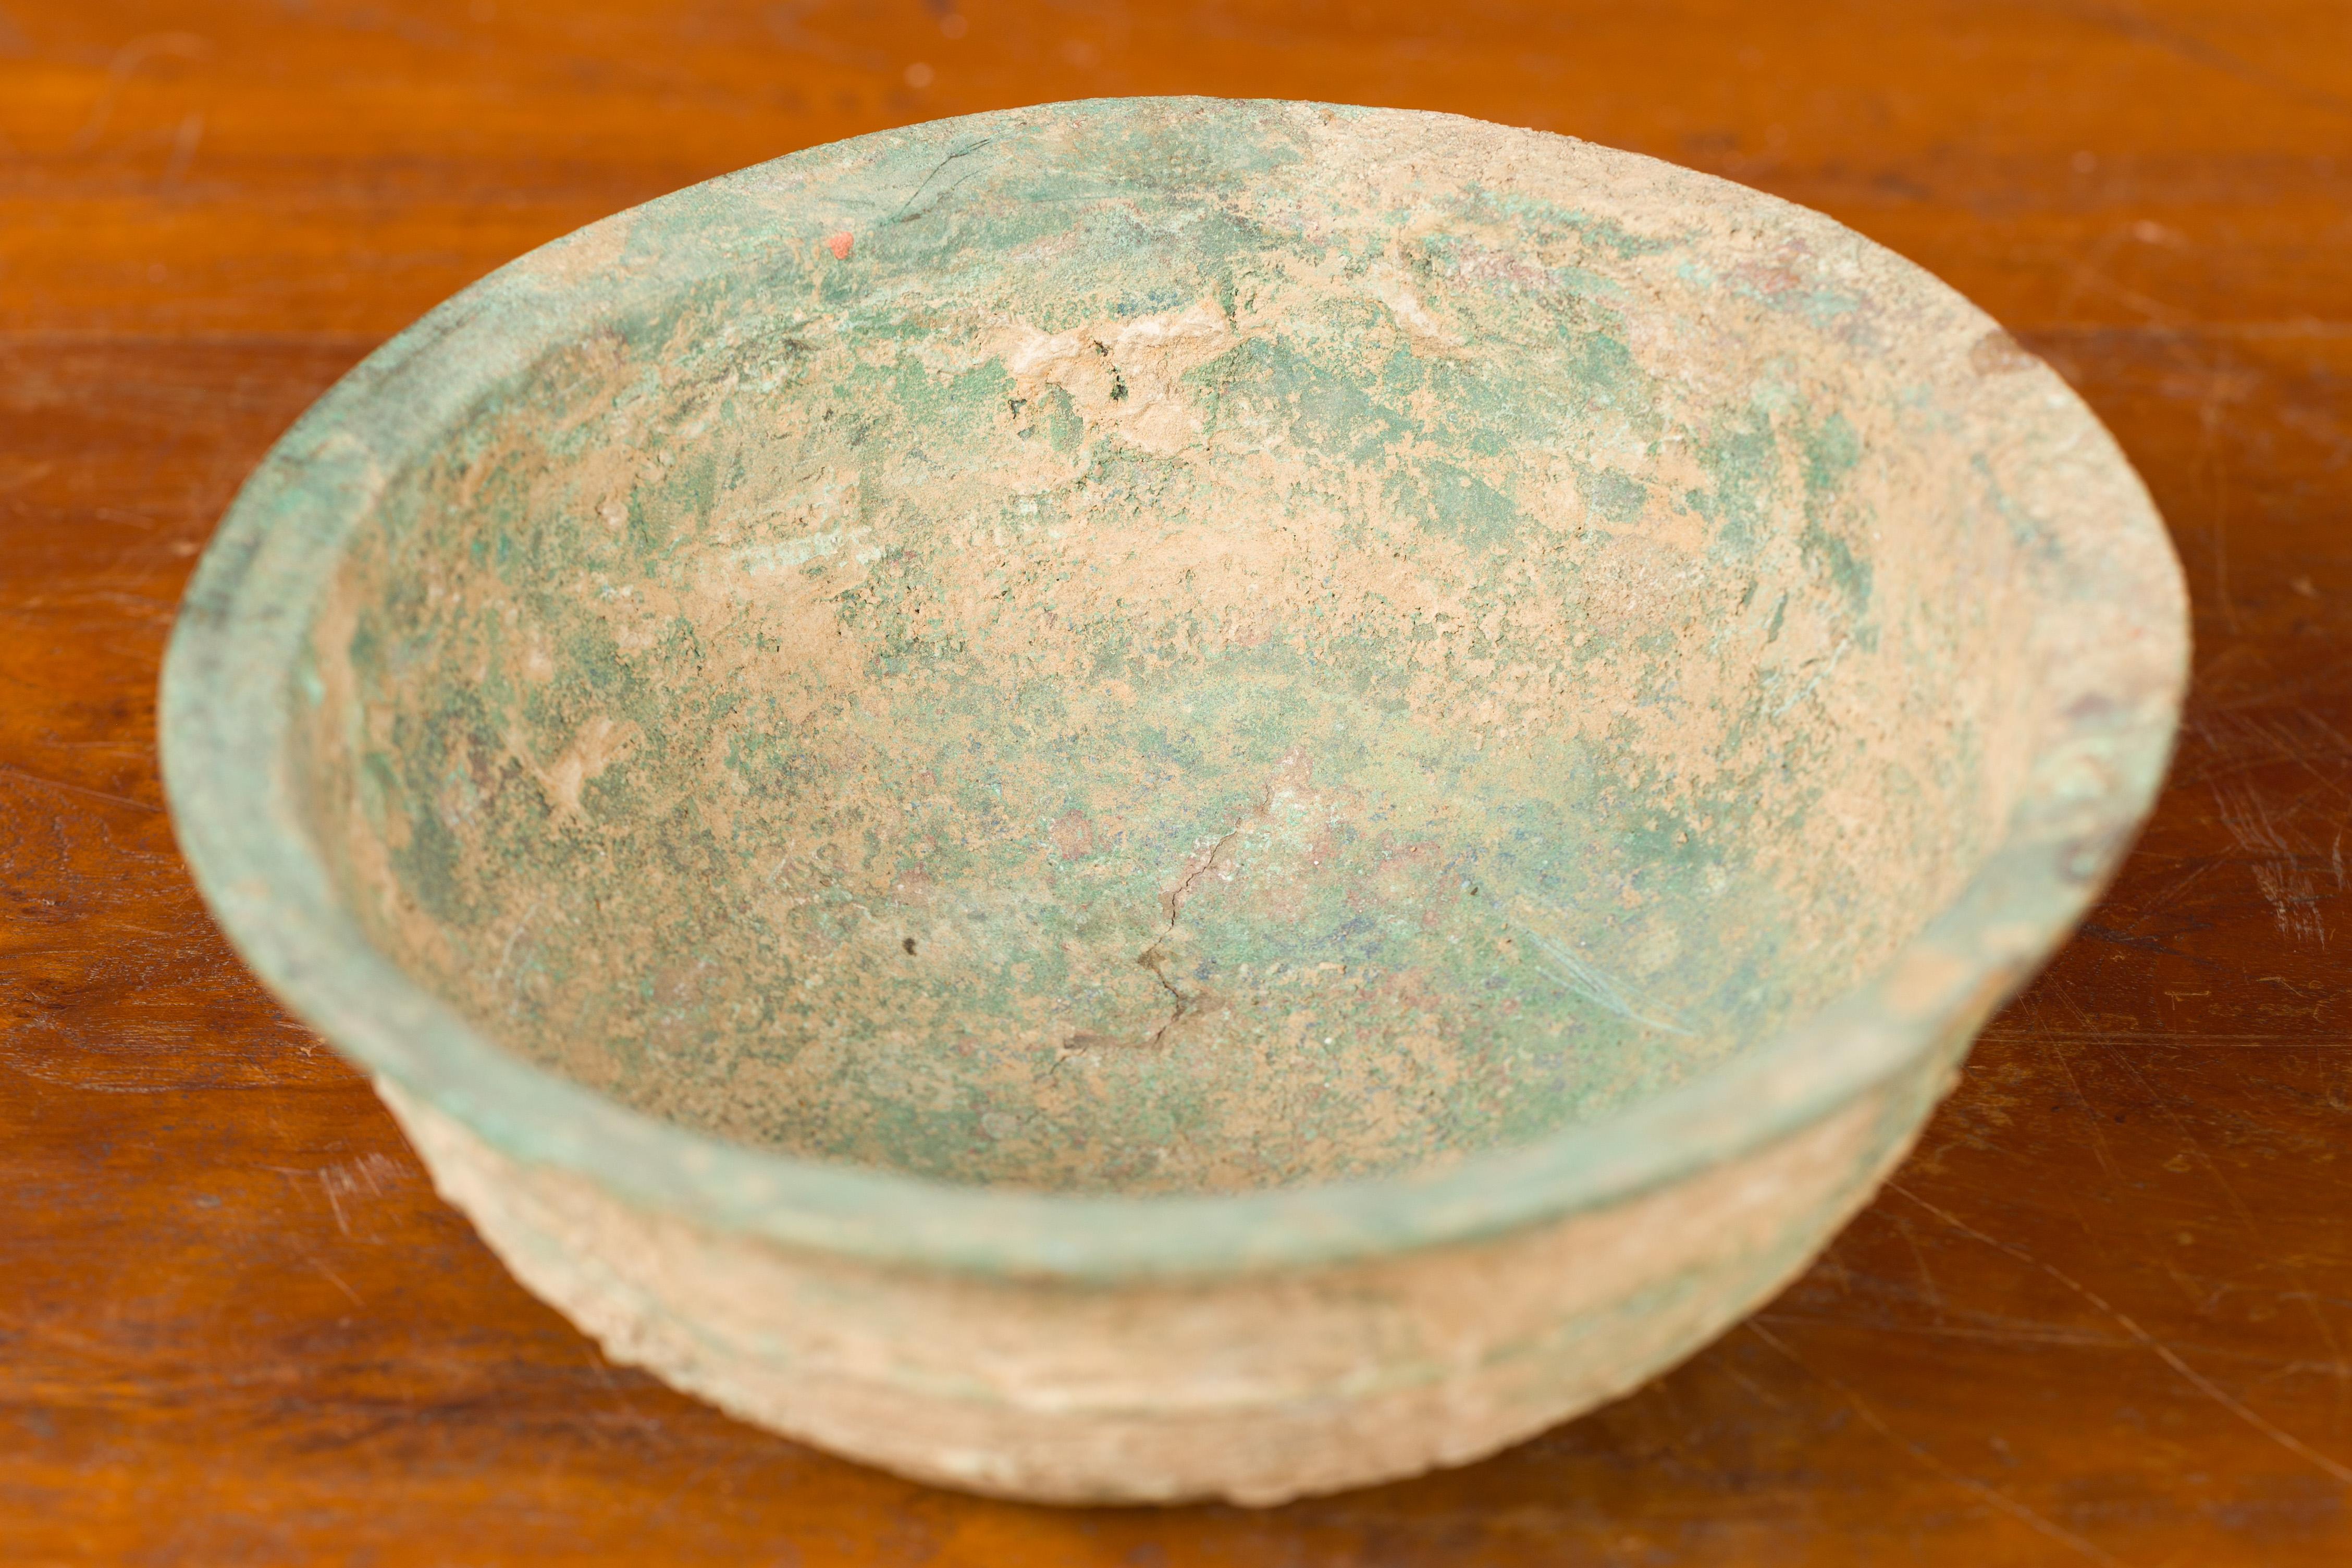 Chinese Han Dynasty Bronze Bowl circa 202 BC-200 AD with Mineral Deposits 4